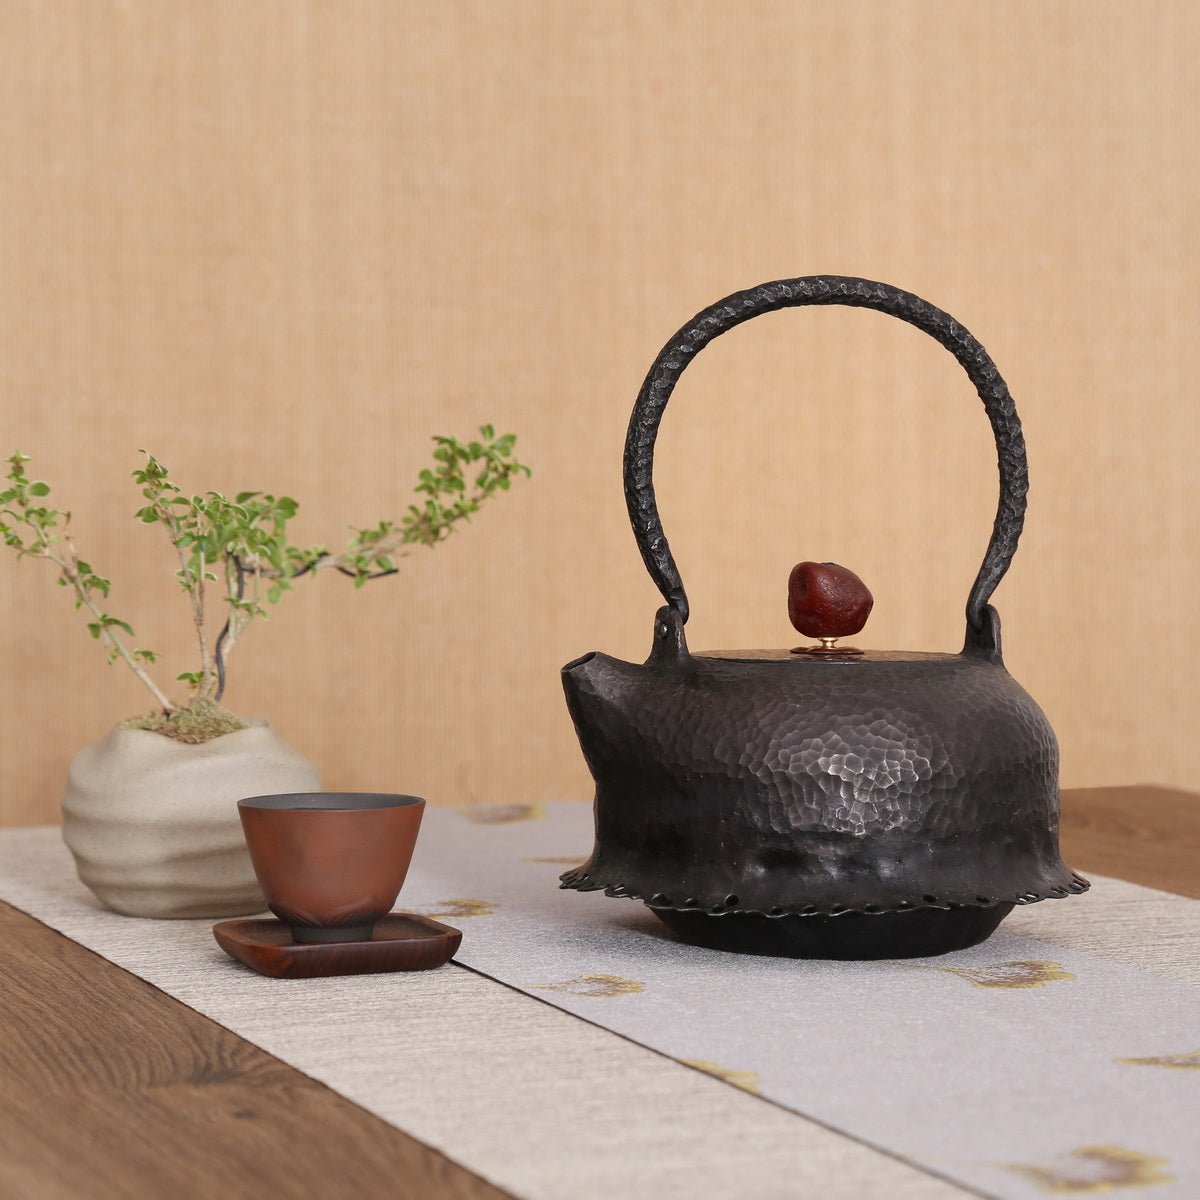 TS Iron Handcraft Iron Kettle (wrought iron) - Large, with skirt, Amber button - Taishan Tea Club